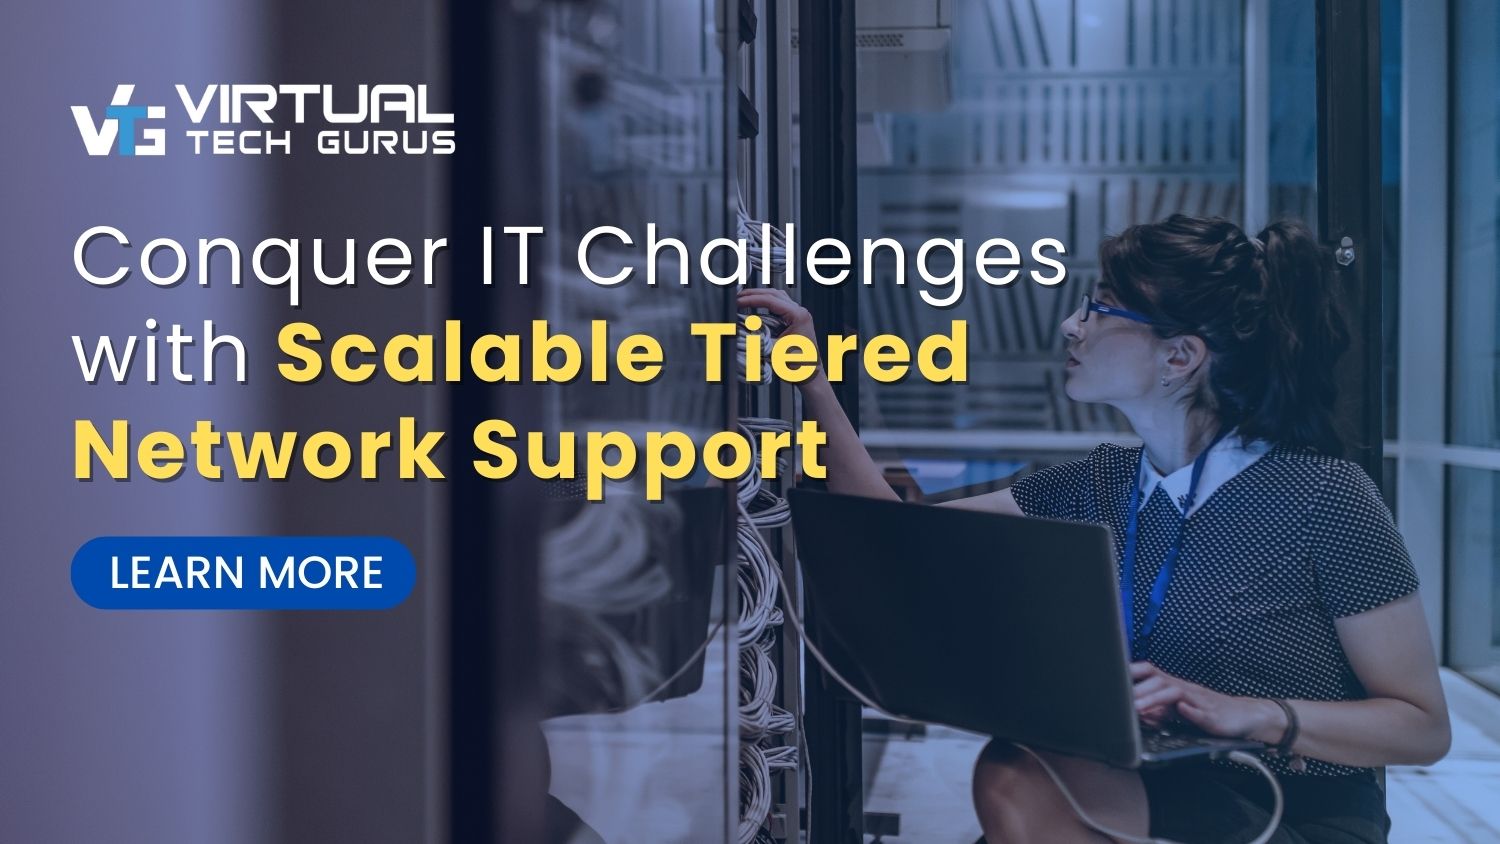 Conquer IT Challenges with Scalable Tiered Network Support